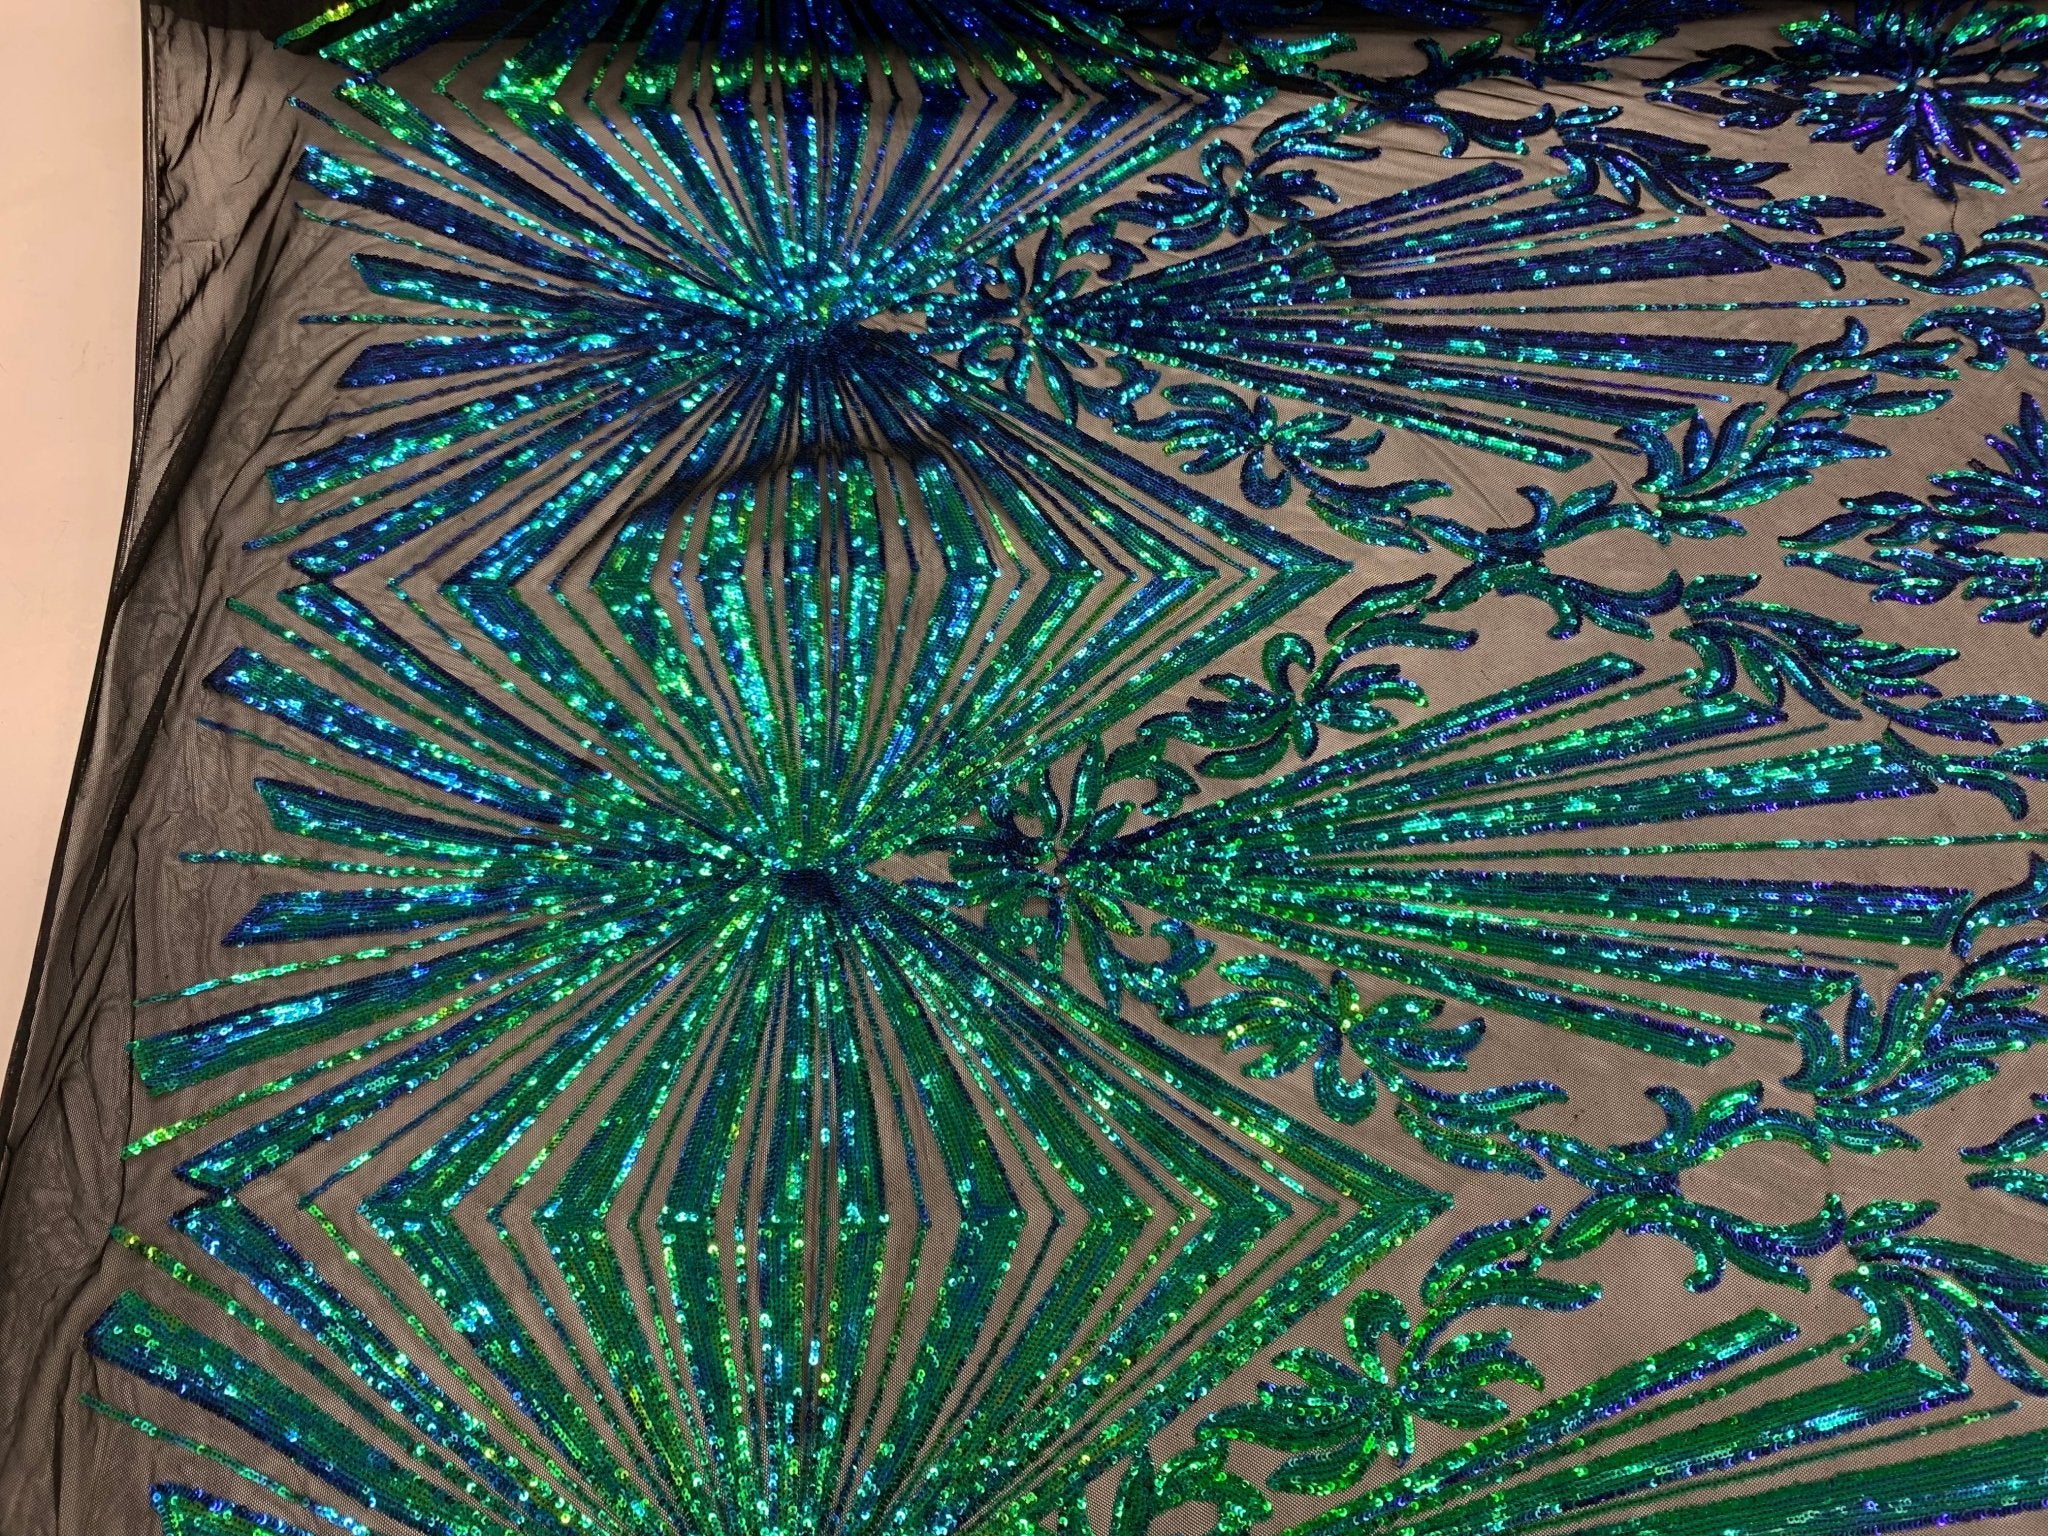 Iridescent Green 4 Way Stretch Sequin Fabric By The YardICEFABRICICE FABRICSIridescent Green 4 Way Stretch Sequin Fabric By The Yard ICEFABRIC